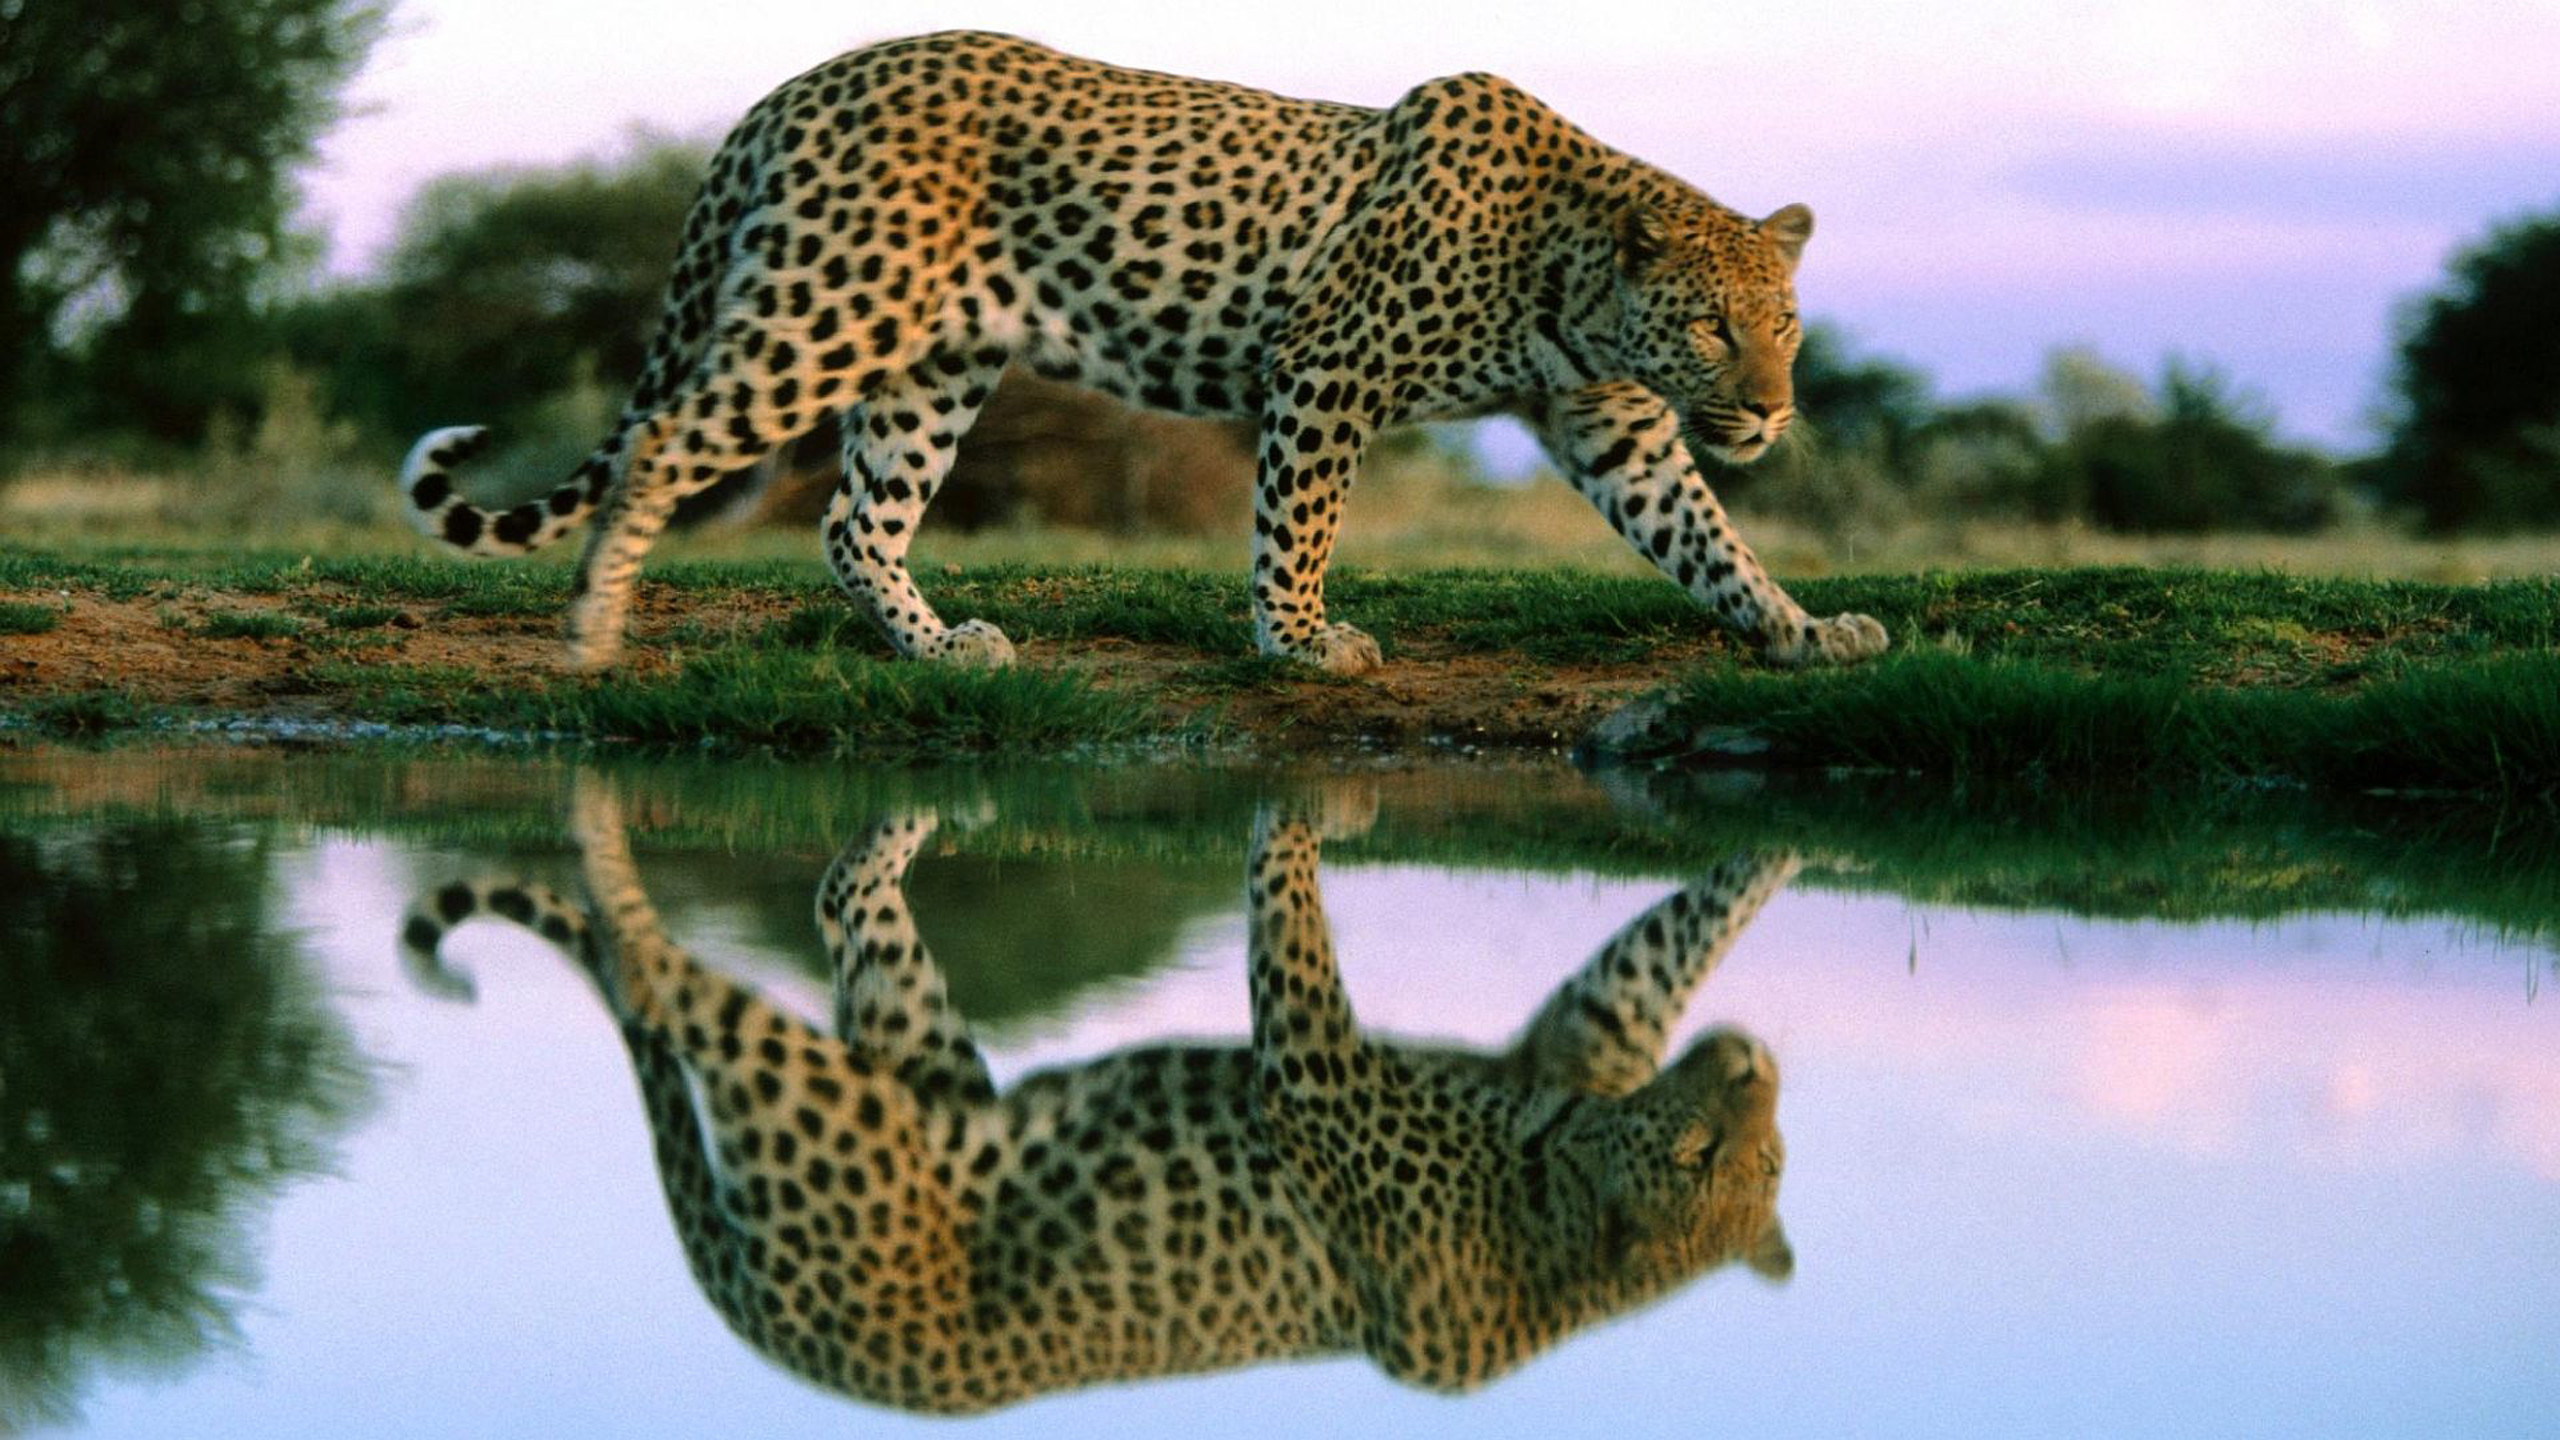 2560x1440 Cheetah Reflection In Water Wildlife Animal Desktop Wallpaper Hd For Mobile  Phones And Laptops